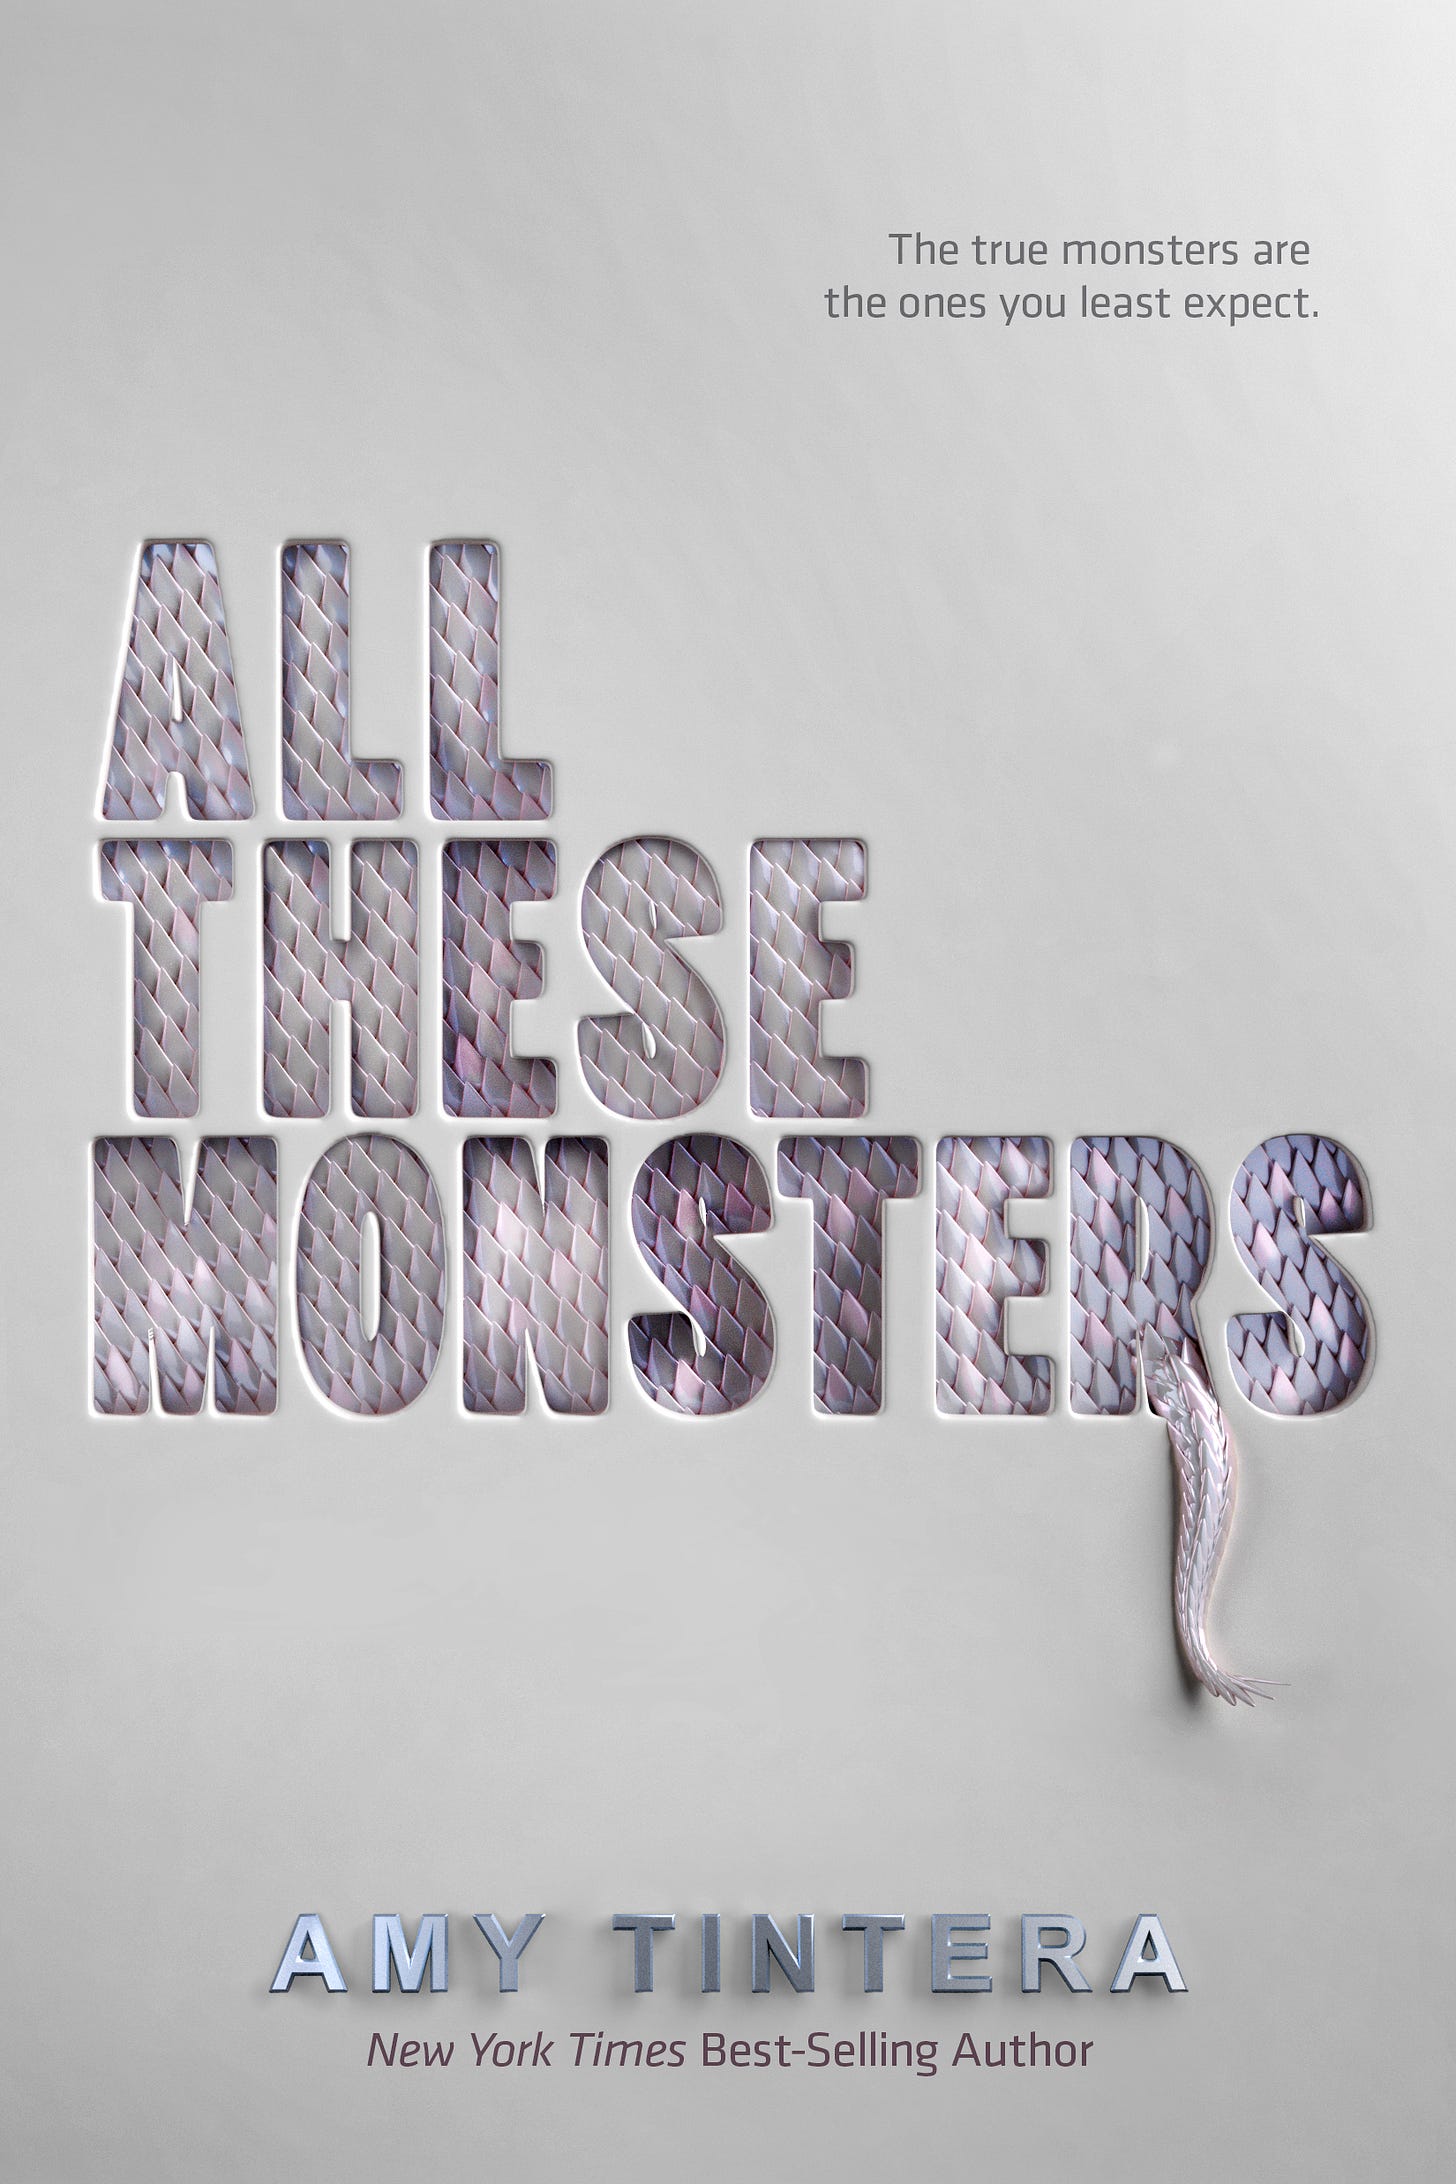 All These Monsters (Monsters, #1) by Amy Tintera